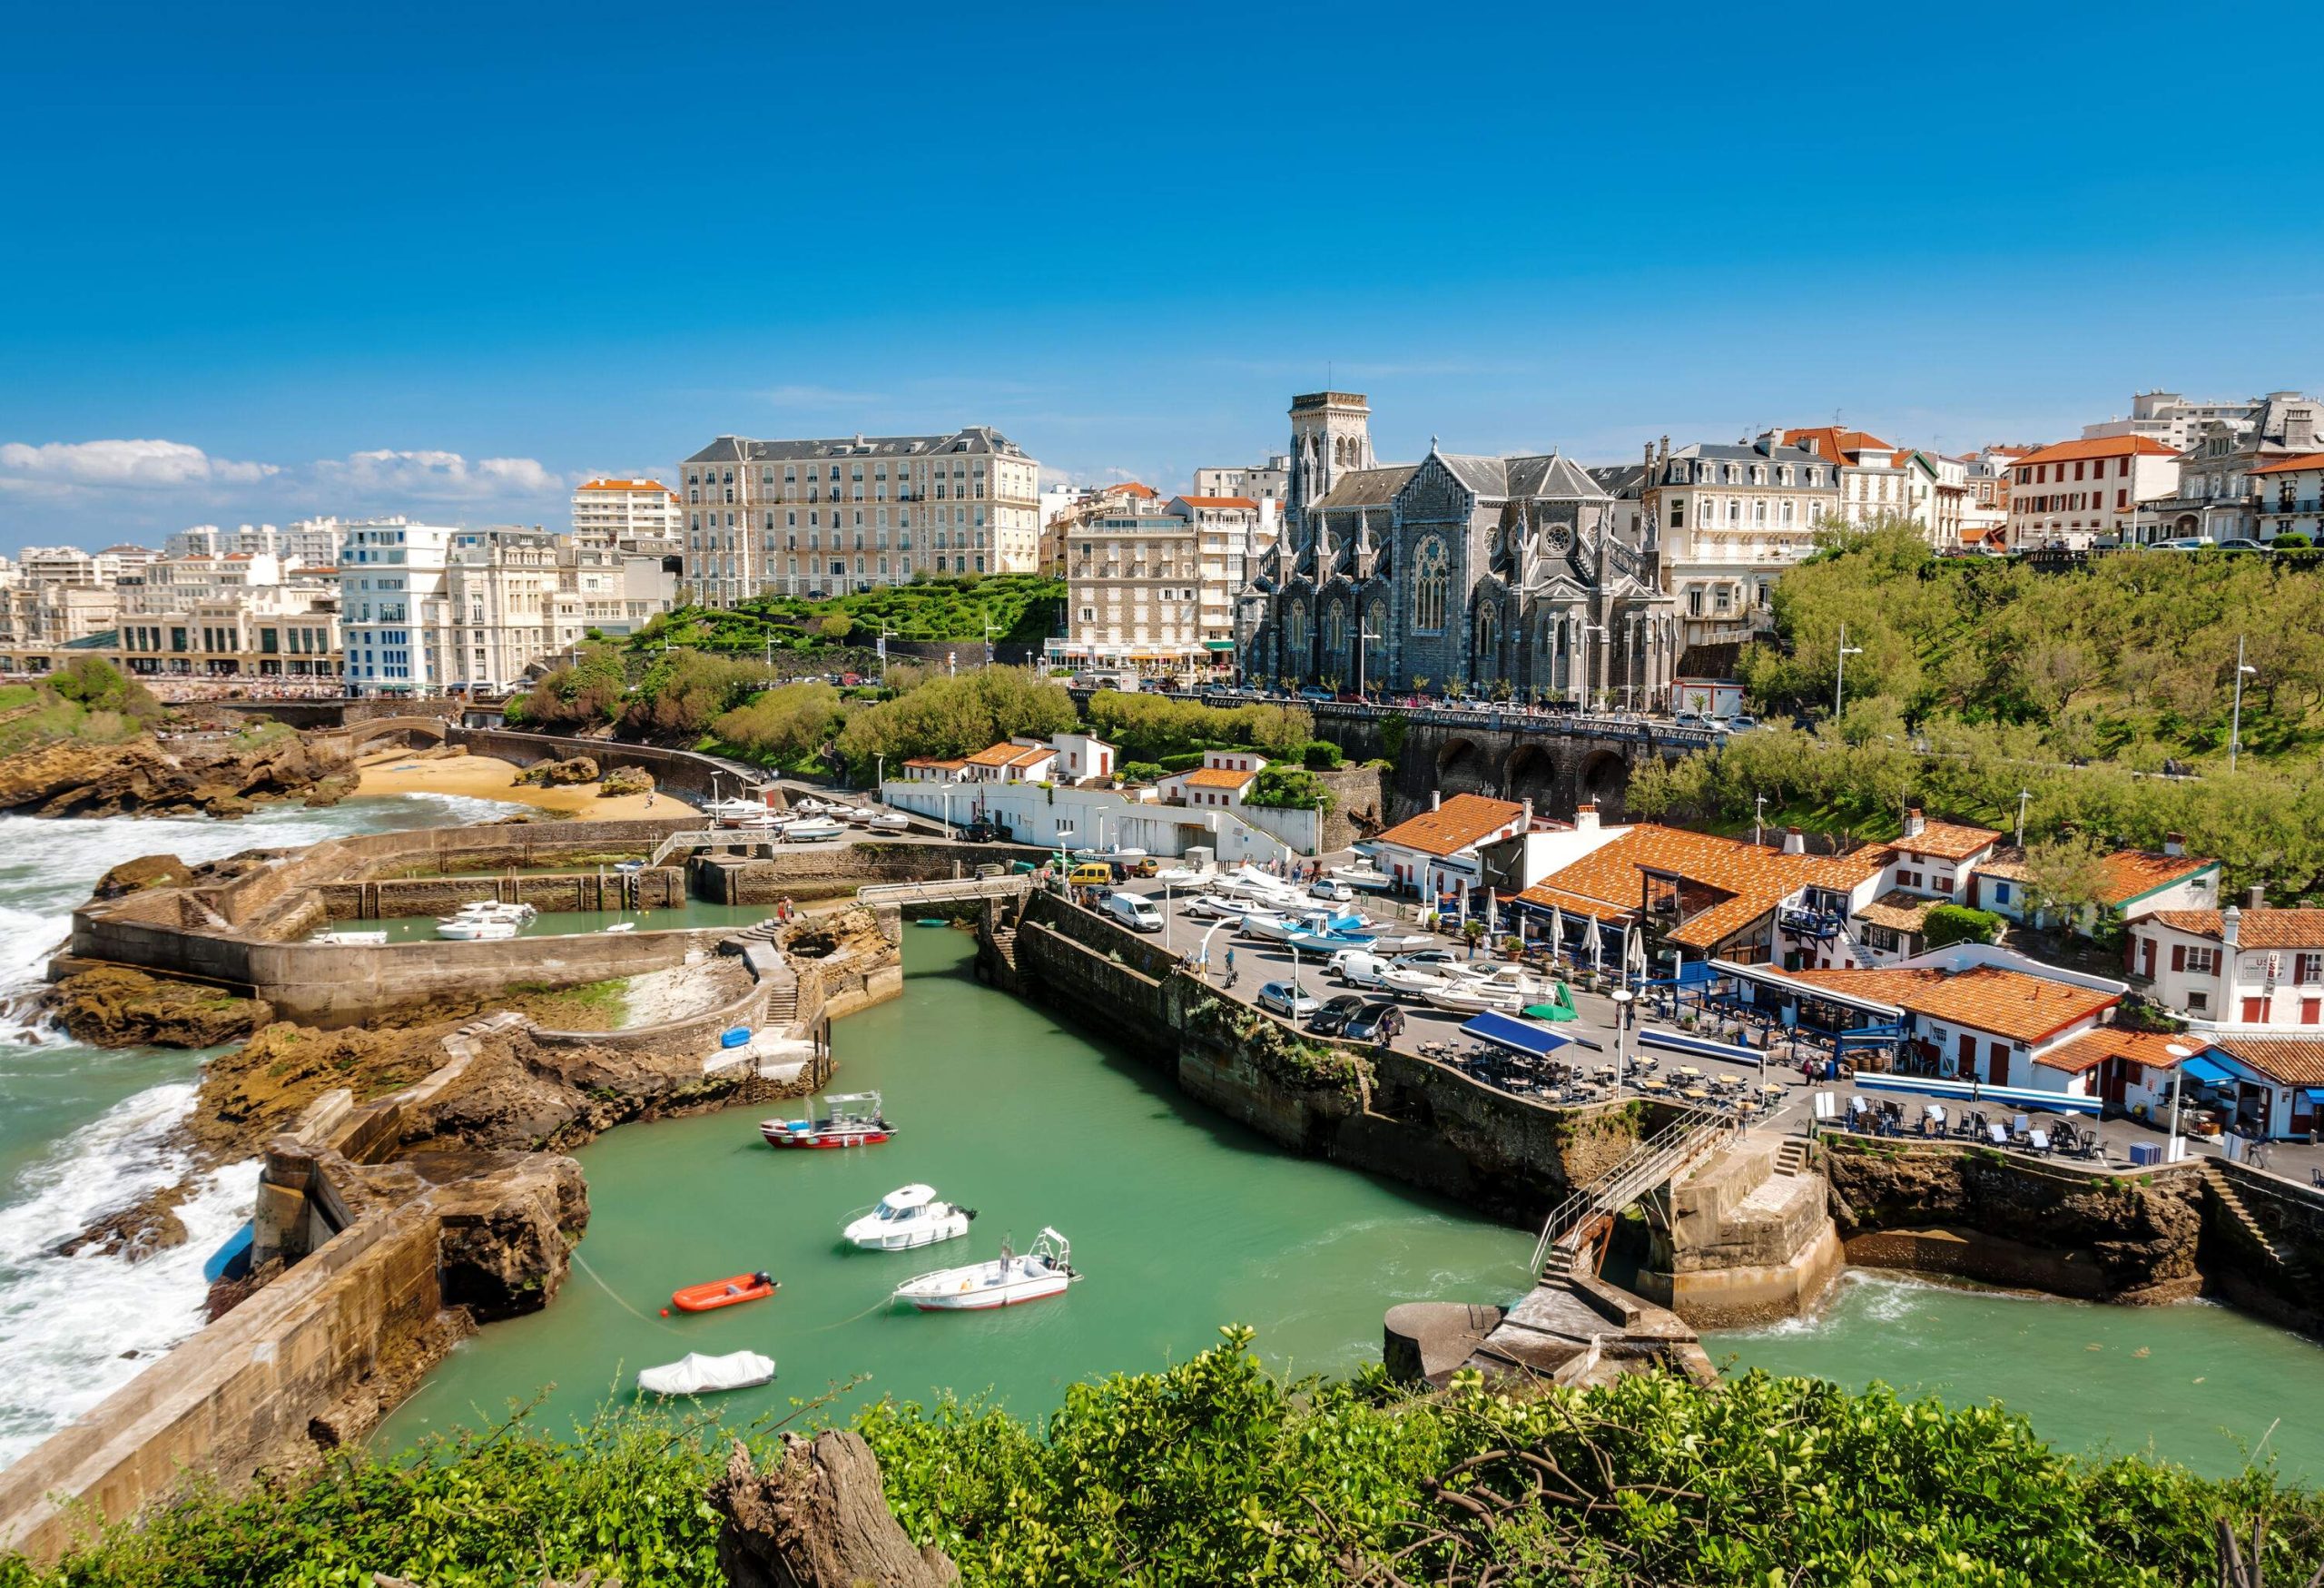 A picturesque seaside town lined with classic elegant buildings and a port.